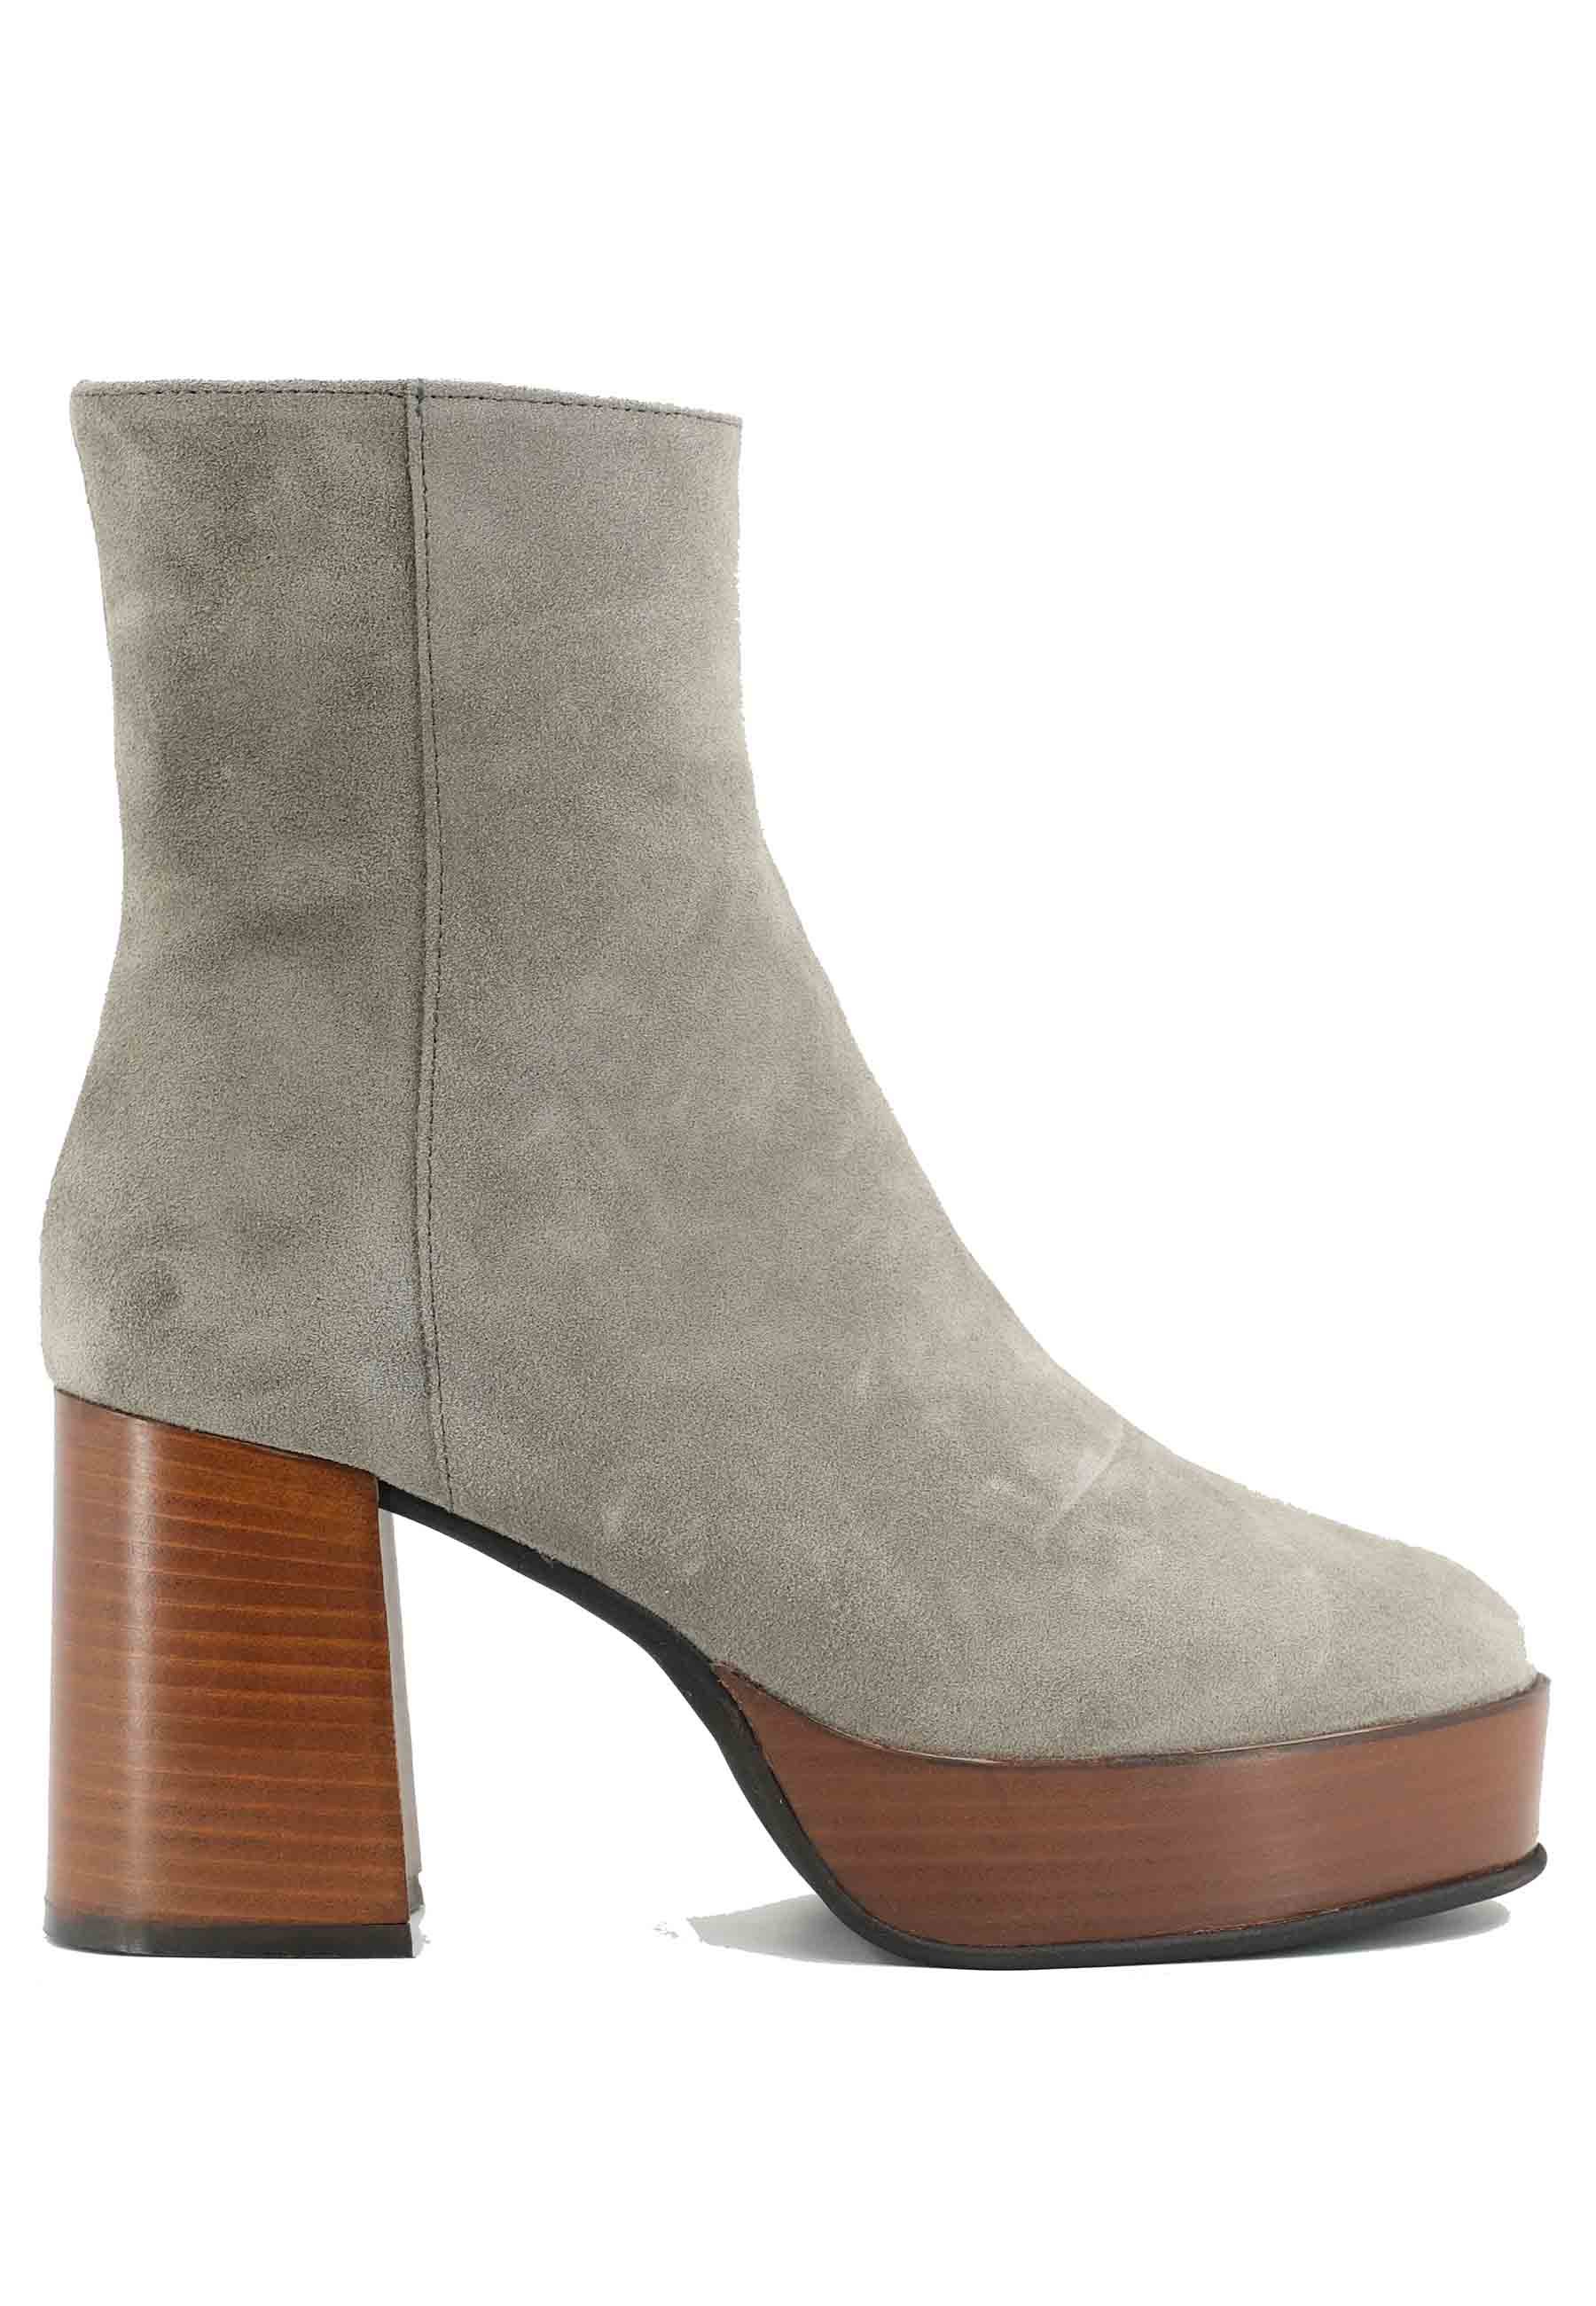 TR1556 gray suede ankle boots with high heel and platform with side zip closure